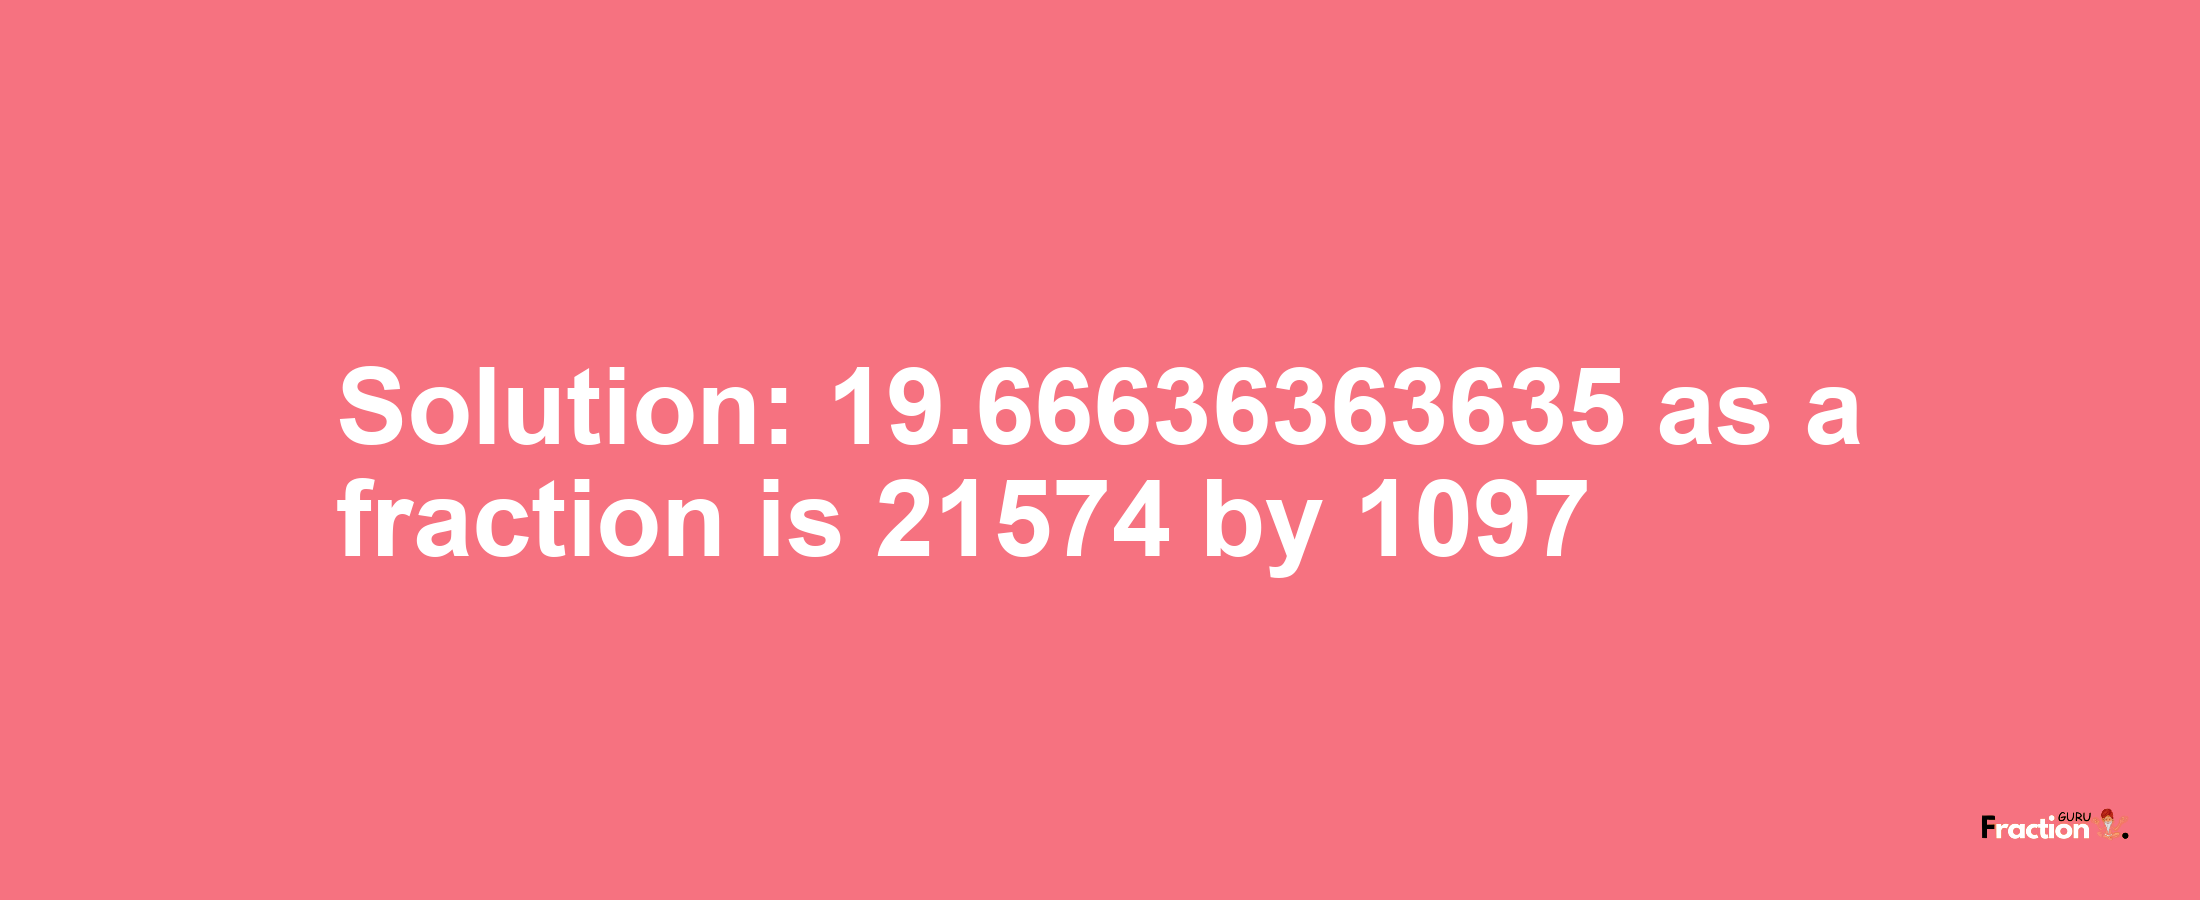 Solution:19.66636363635 as a fraction is 21574/1097